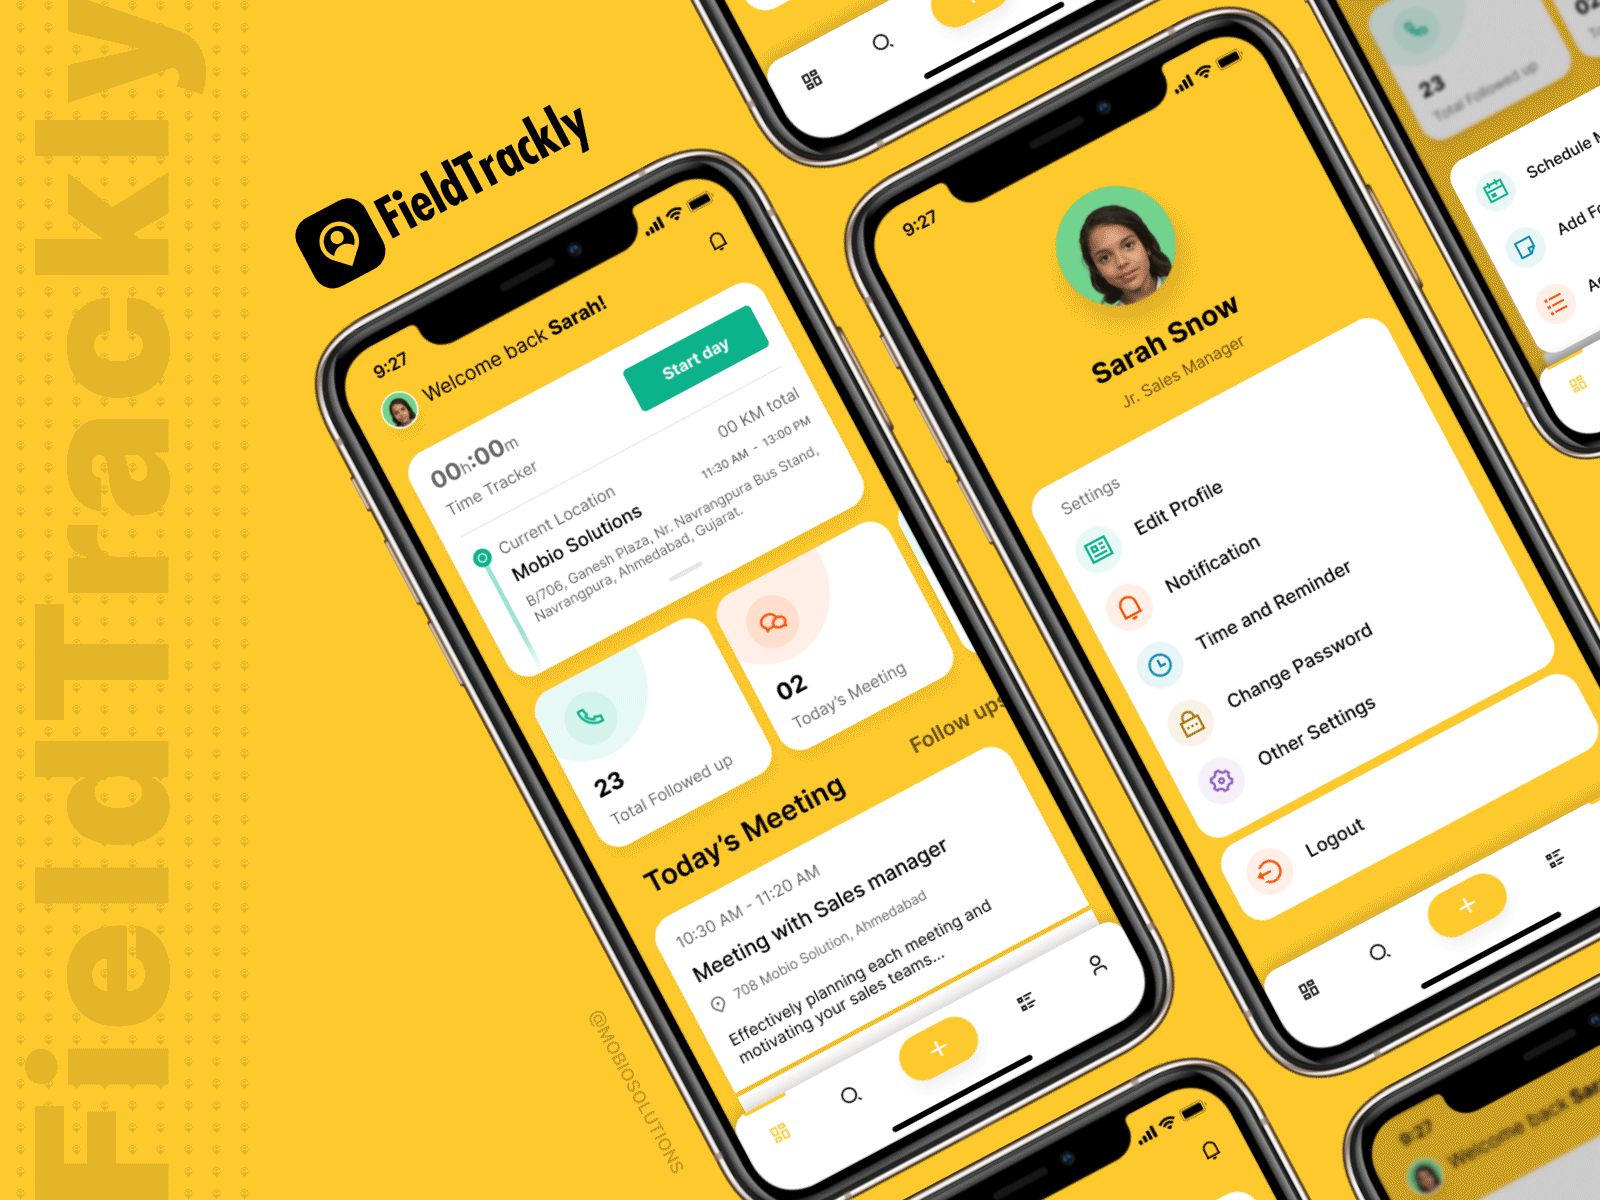 Field Staff Tracking App - FieldTrackly android android app design app design application design bootstrap design download for free employee field figma figmadesign free ios app design managment mobile app design mobile ui staff uidesign uiux ux